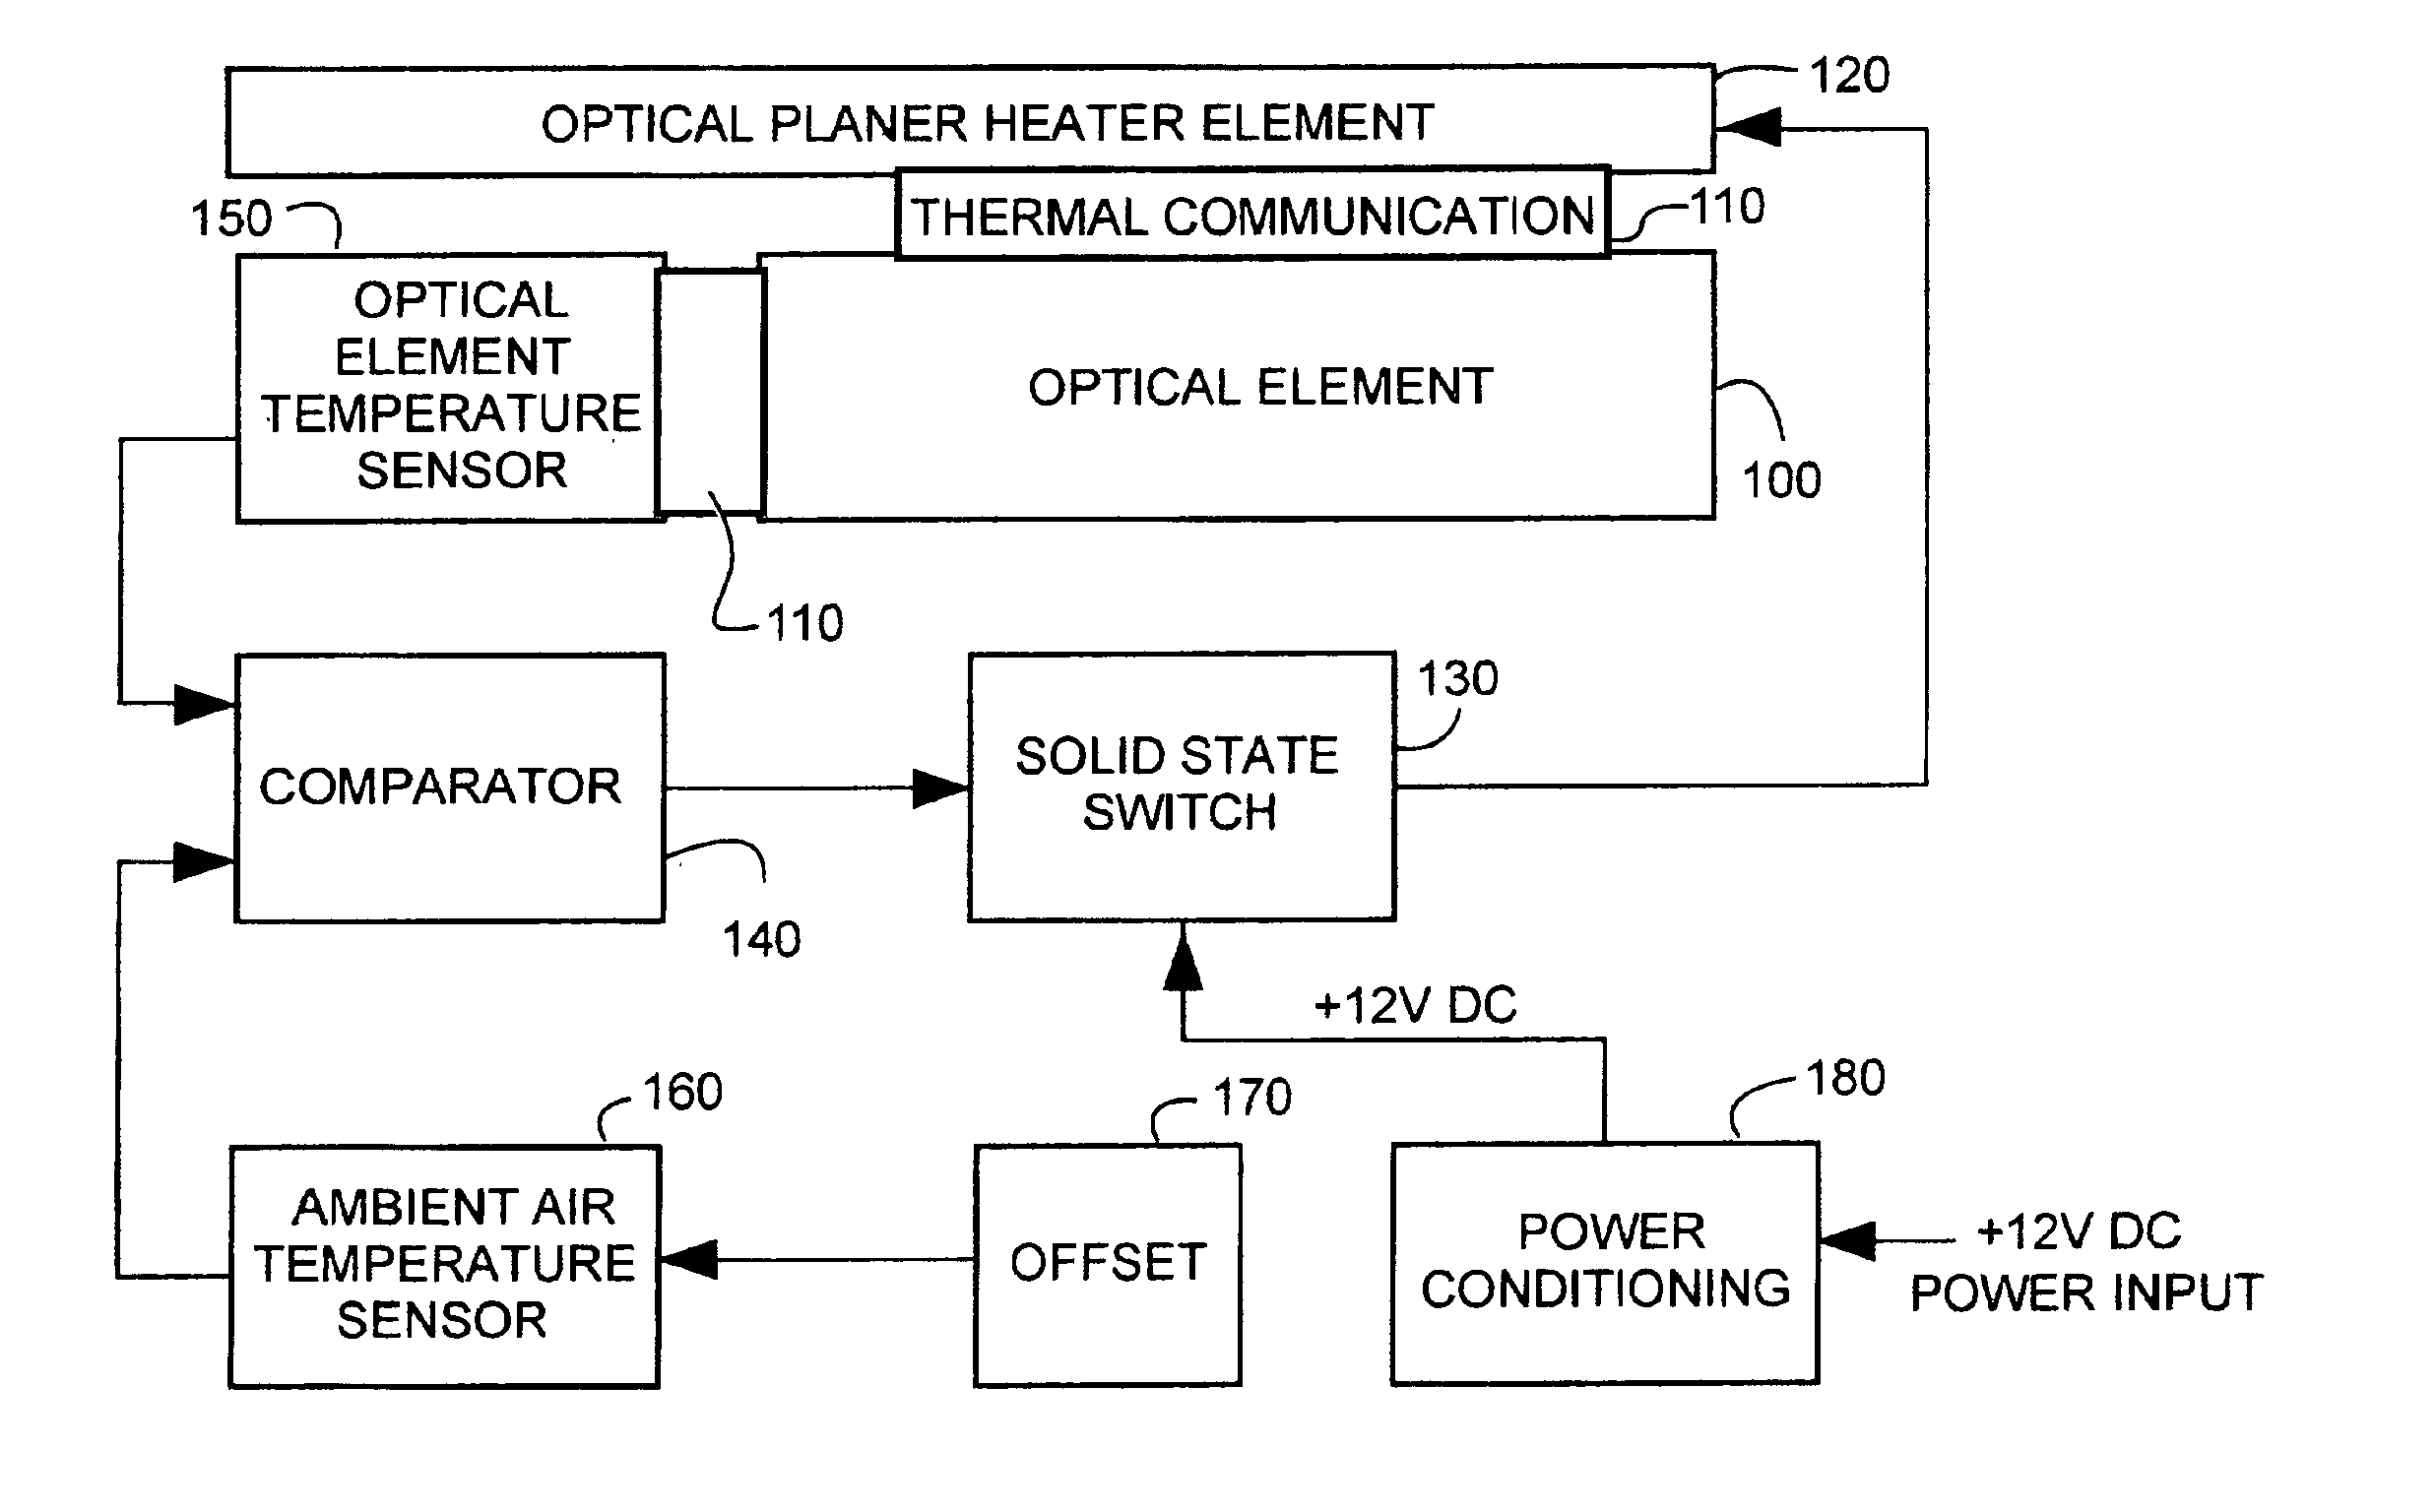 Thermal condensate reducer for optical devices